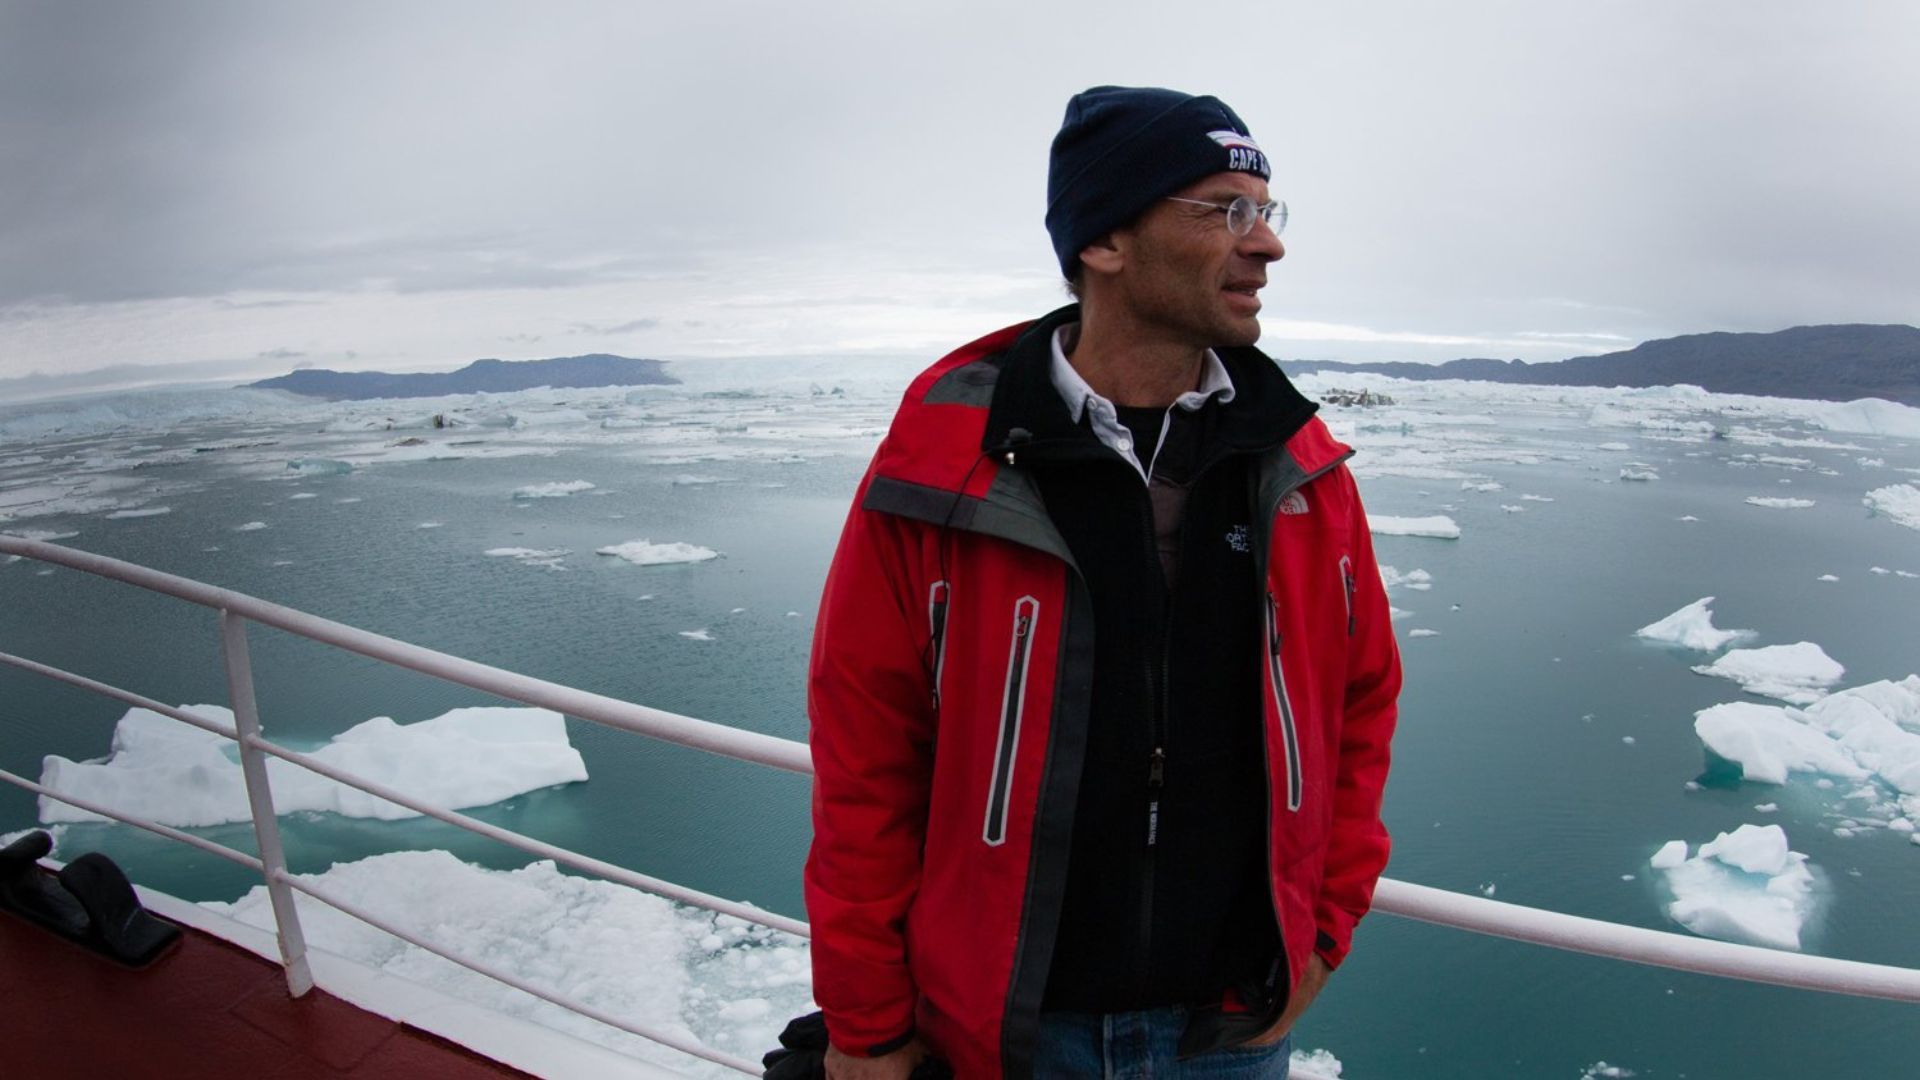 <p>Eric Rignot, a professor of Earth Sciences at UC Irvine and the lead author of the reported findings, noted that “We know that warm (ocean) water eats ice from below when that ice is floating.”     </p> <p>He added more information about the process; “Because tides lift up the glaciers, this allows sea water to go very far beneath the glacier; much farther than we thought.” Scientists were not previously aware that this process occurred under grounded ice.     </p>